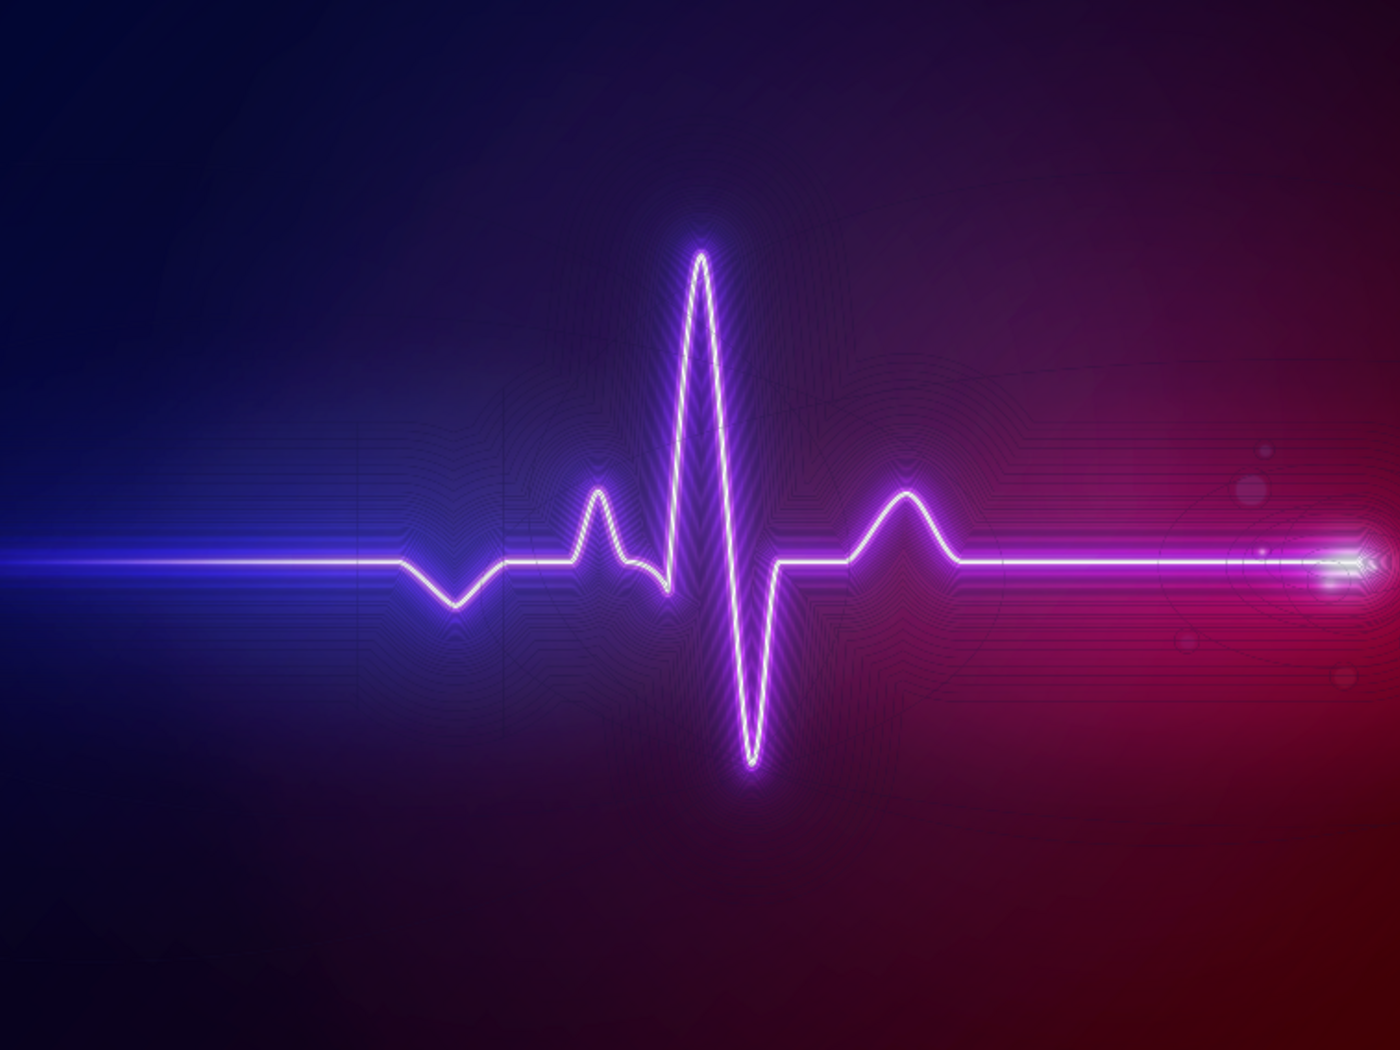 Stylized blue, purple, and red ECG reading on black background